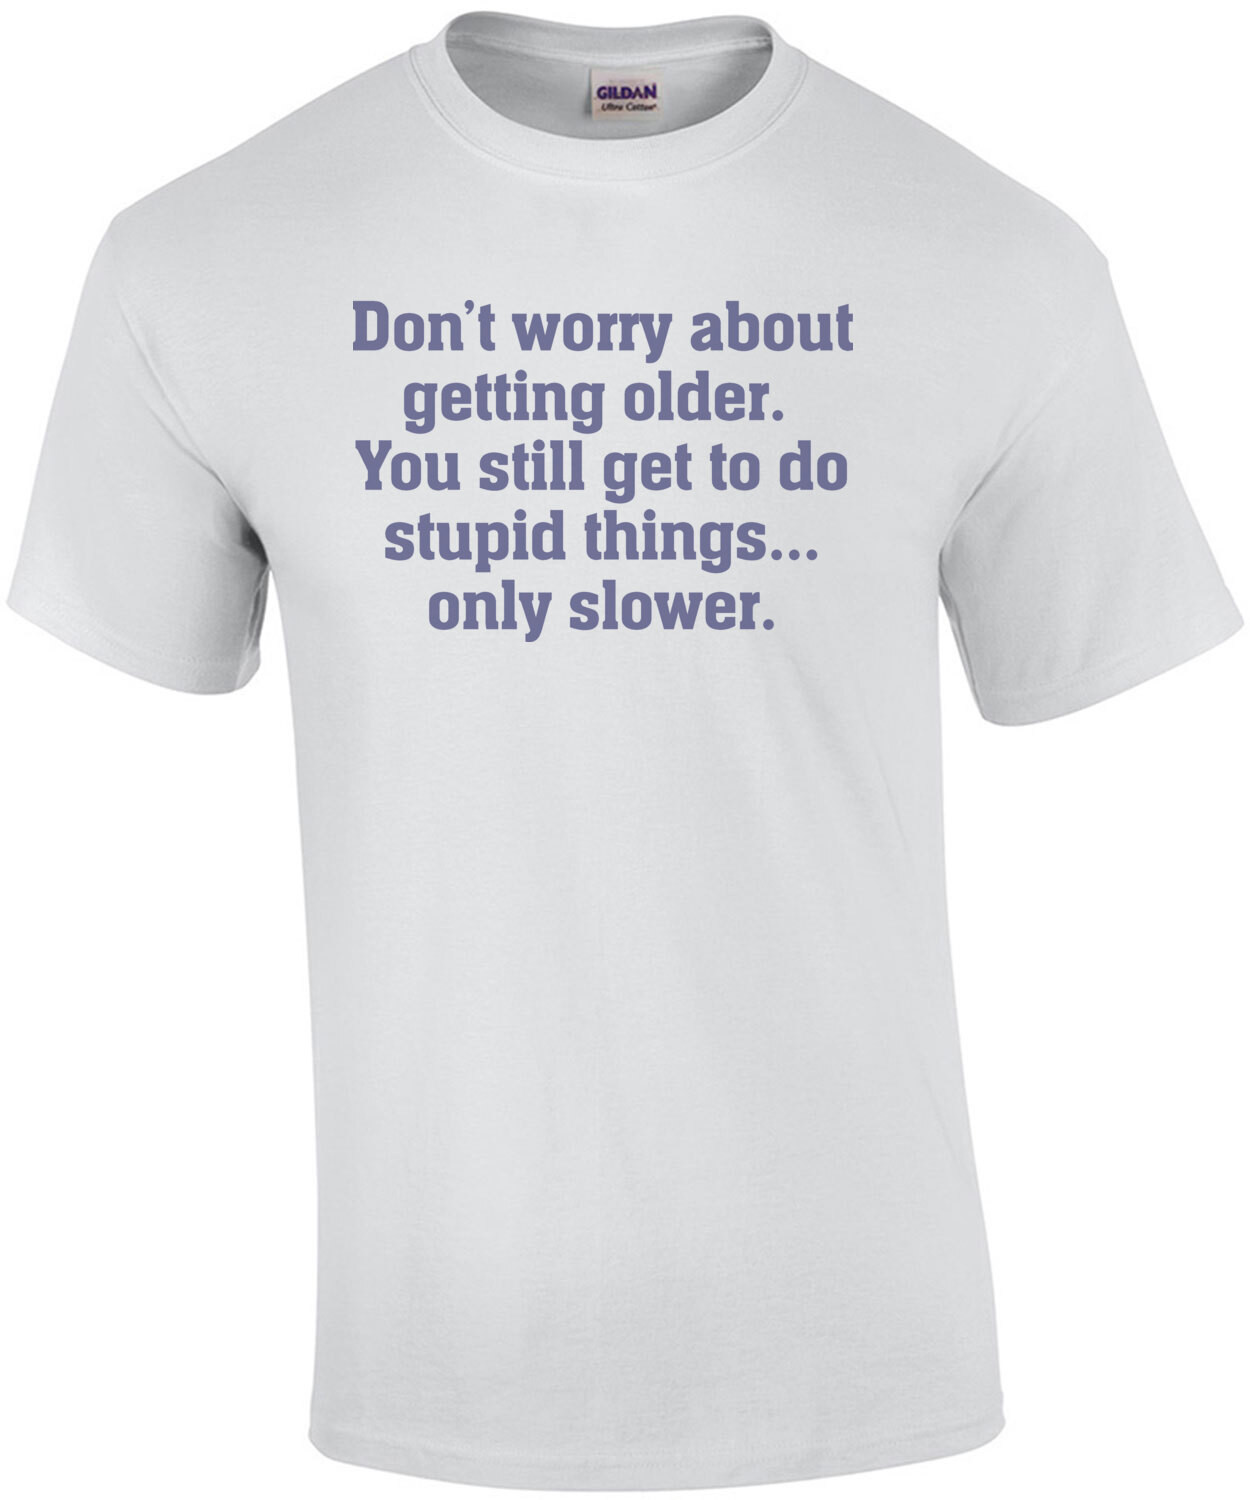 Don’t worry about getting older. You still get to do stupid things, only slower. Funny Old Age T-Shirt